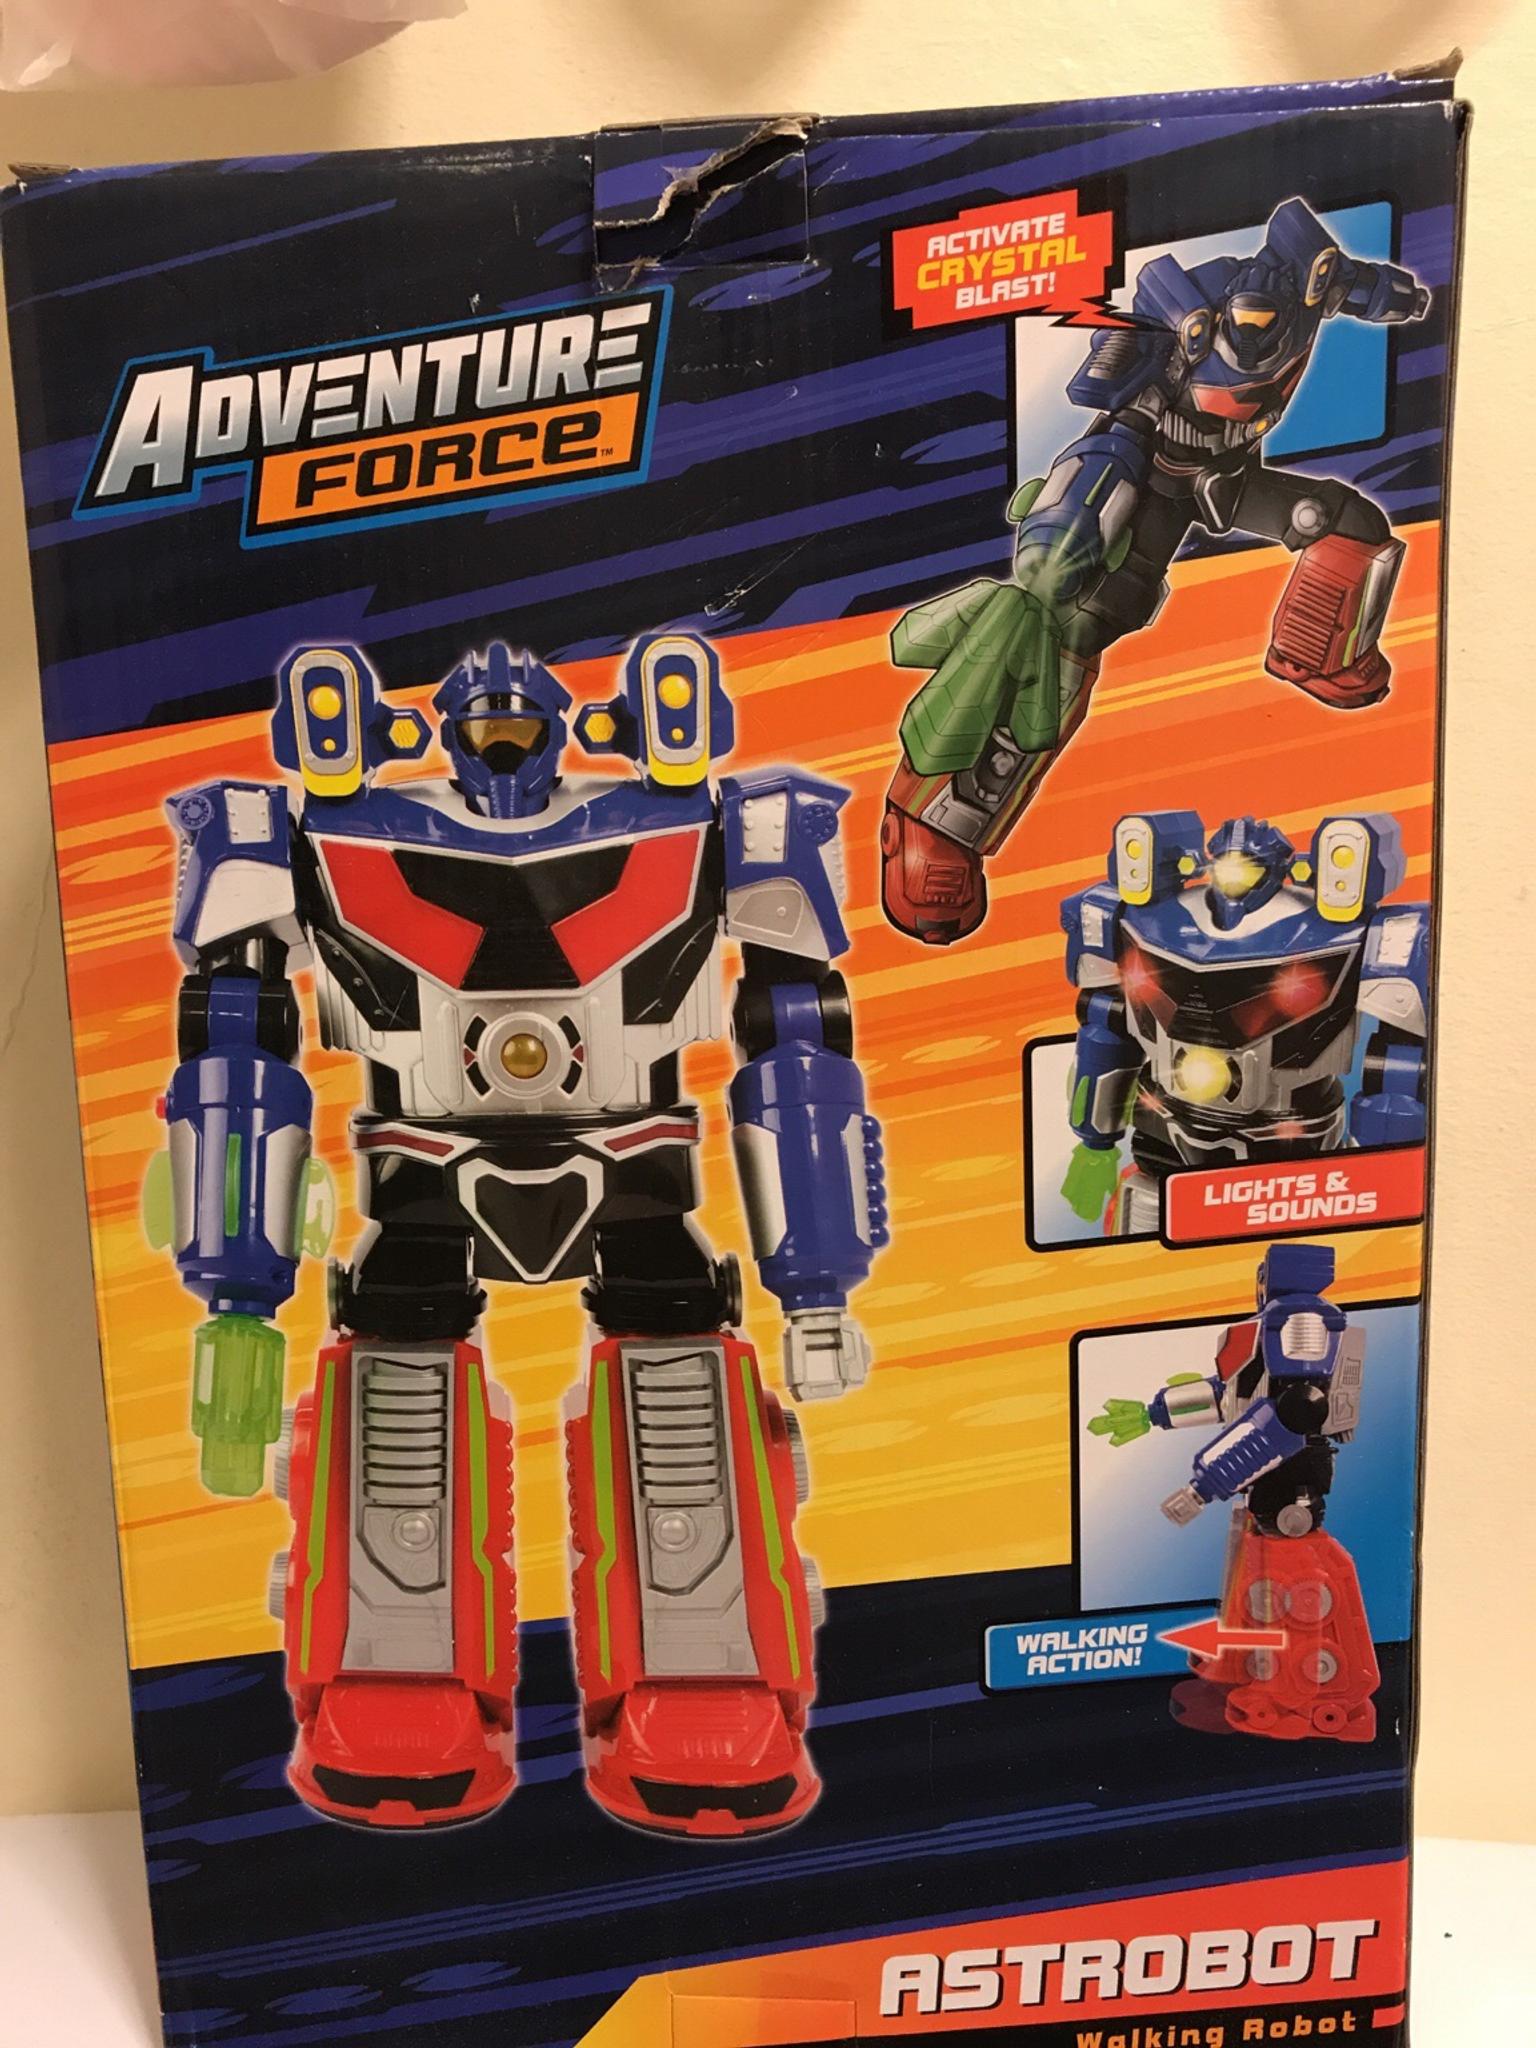 adventure force astrobot walking robot toy with lights & sound